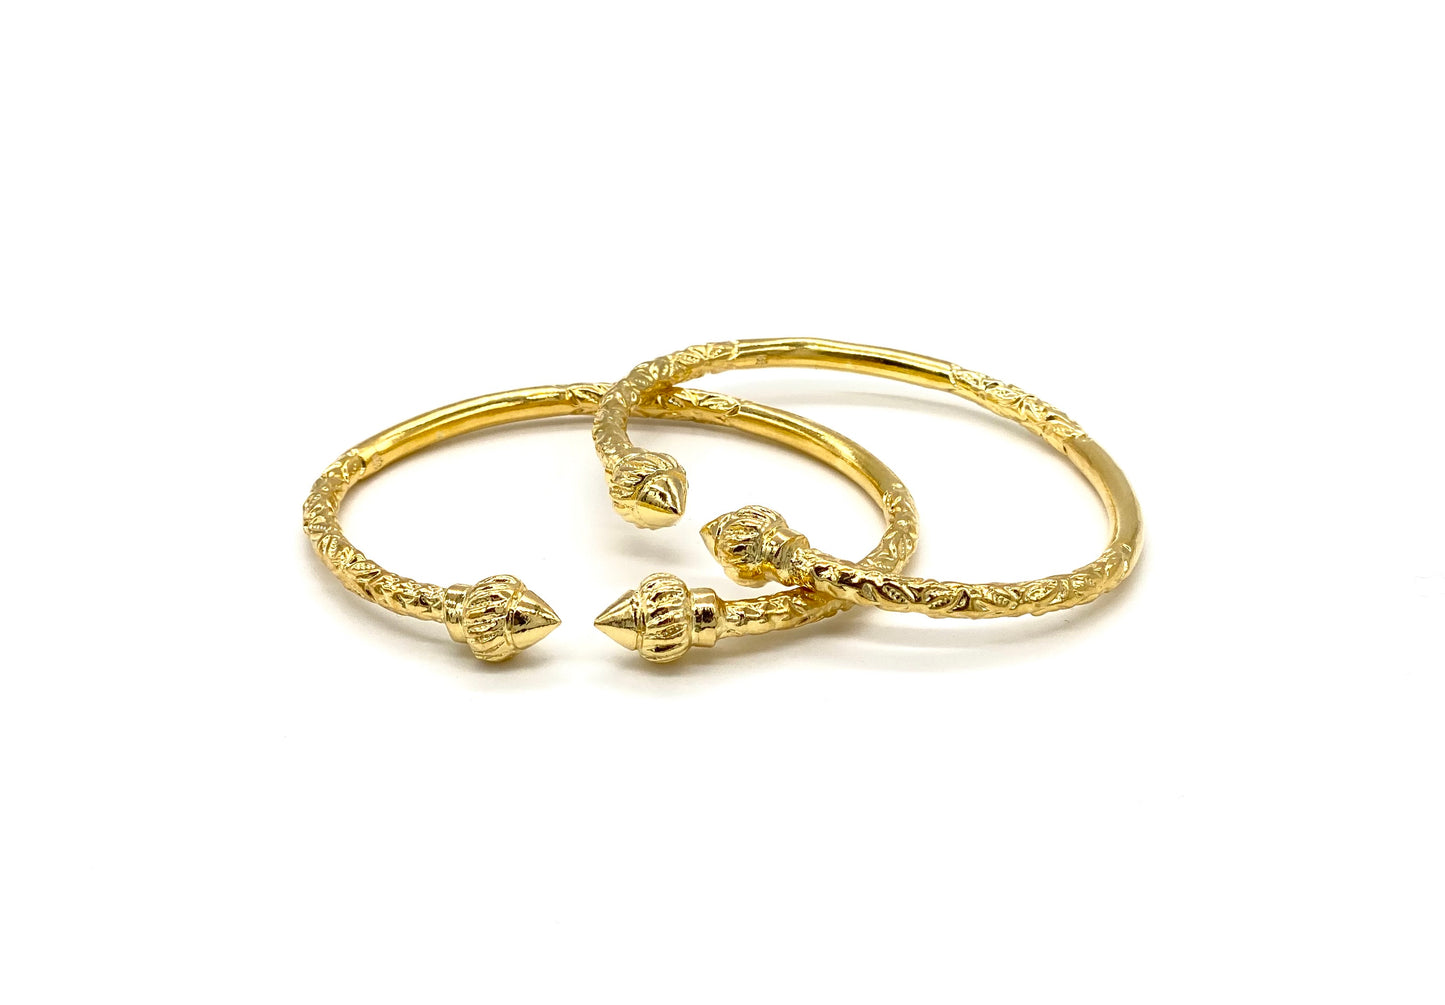 Better Jewelry Solid .925 Sterling Silver Ridged Arrow Taj Mahal Ends West Indian Bangles Plated with 14K Gold (PAIR)